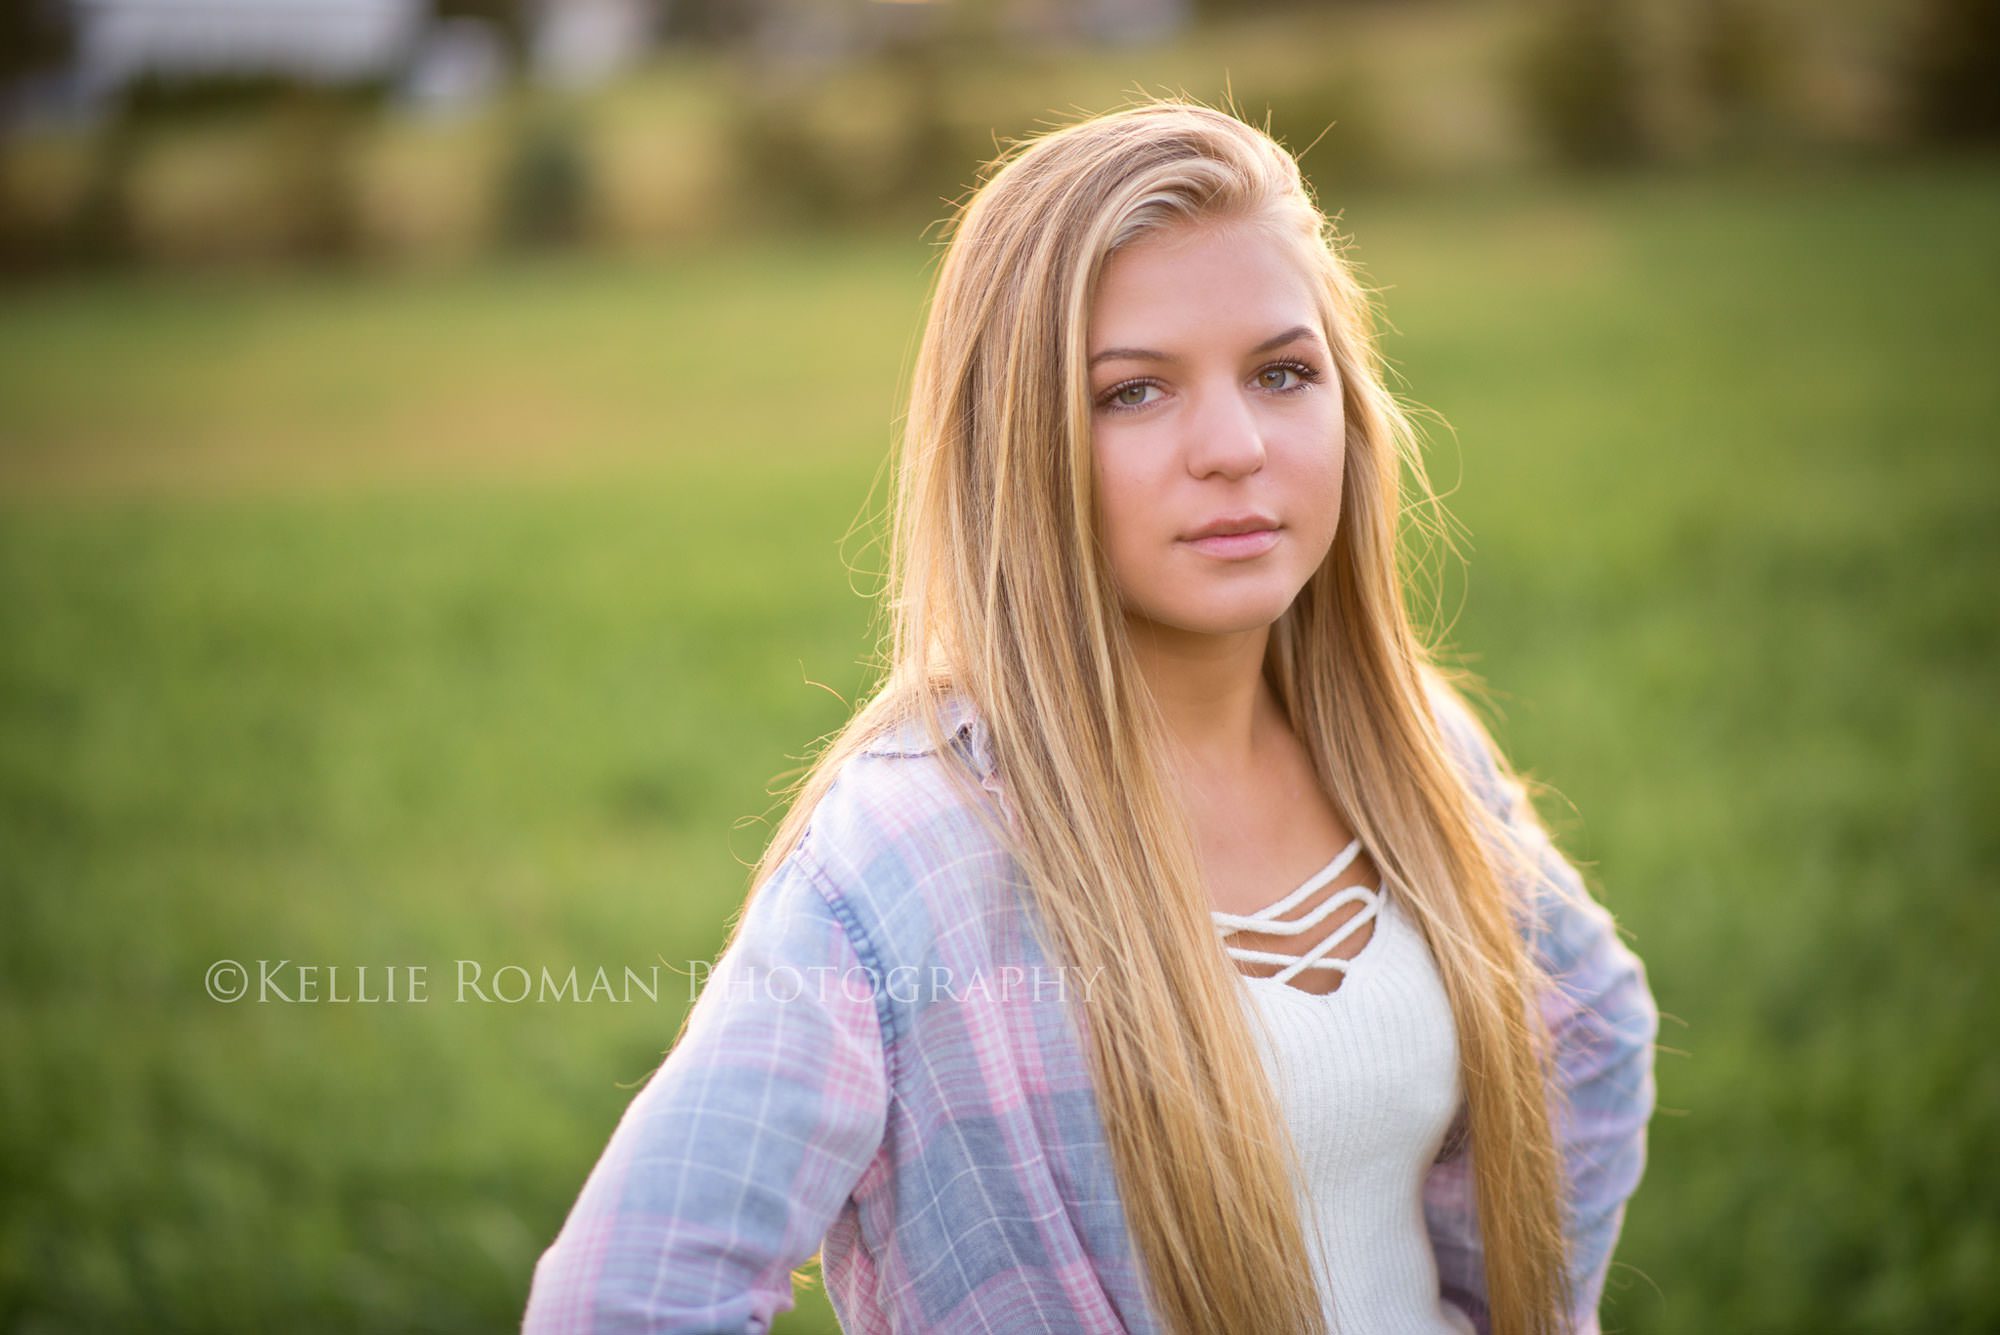 high school senior photos senior girl with serious face standing in field of grass outside on family farm. She has long blonde hair and a flannel shirt on